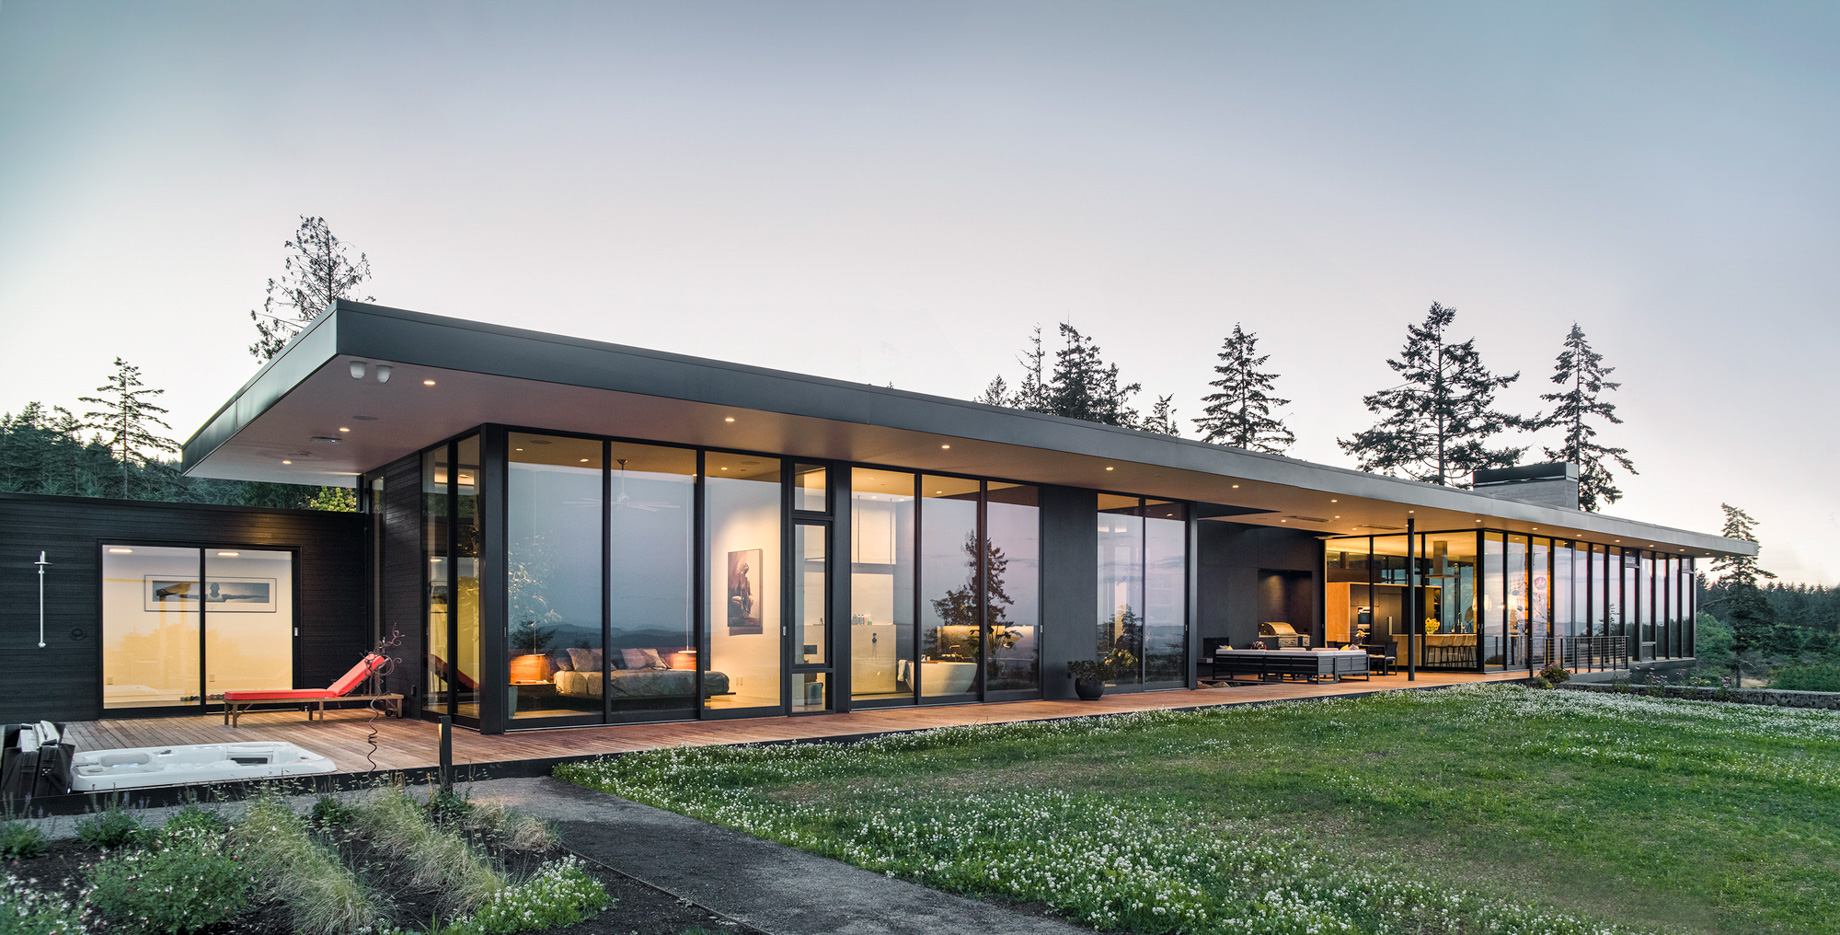 Five Peaks Lookout Residence – Yamhill County, OR, USA